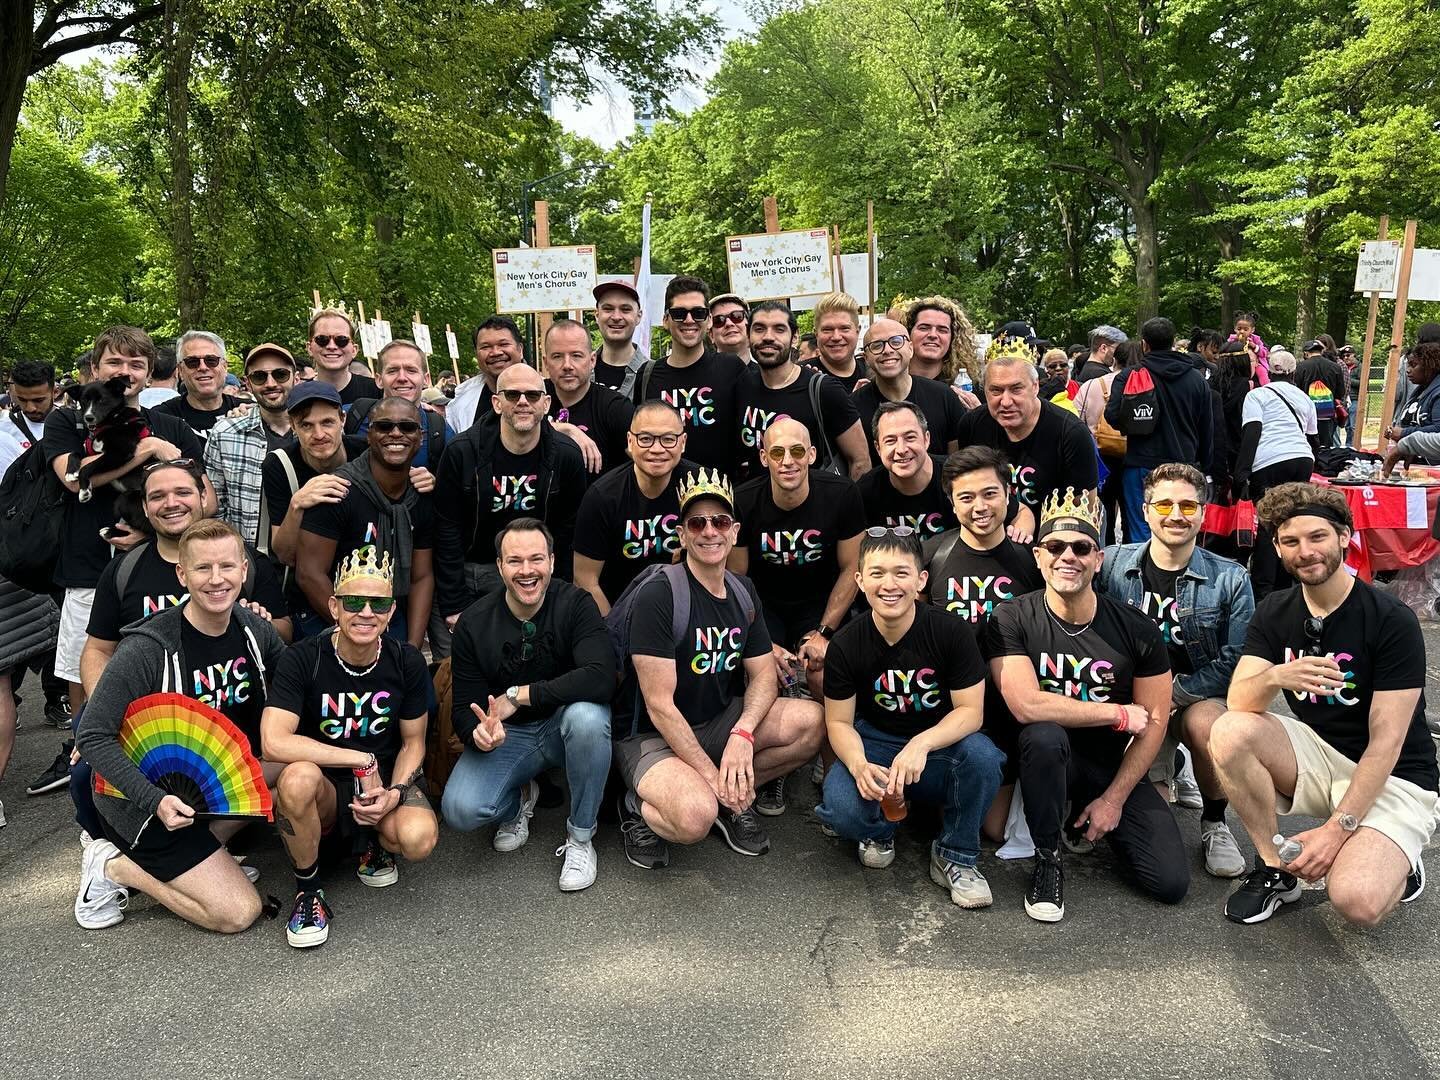 This SUNDAY we&rsquo;ll be lacing up our sneakers, walking, and fundraising at @aidswalkny ❤️👟 Help us reach our fundraising goal of 30K by donating at the #linkinbio ❤️✨

1. AIDS Walk 2023
2. AIDS Walk 2022
3. AIDS Walk 2019
4. AIDS Walk 2018 w/ @l